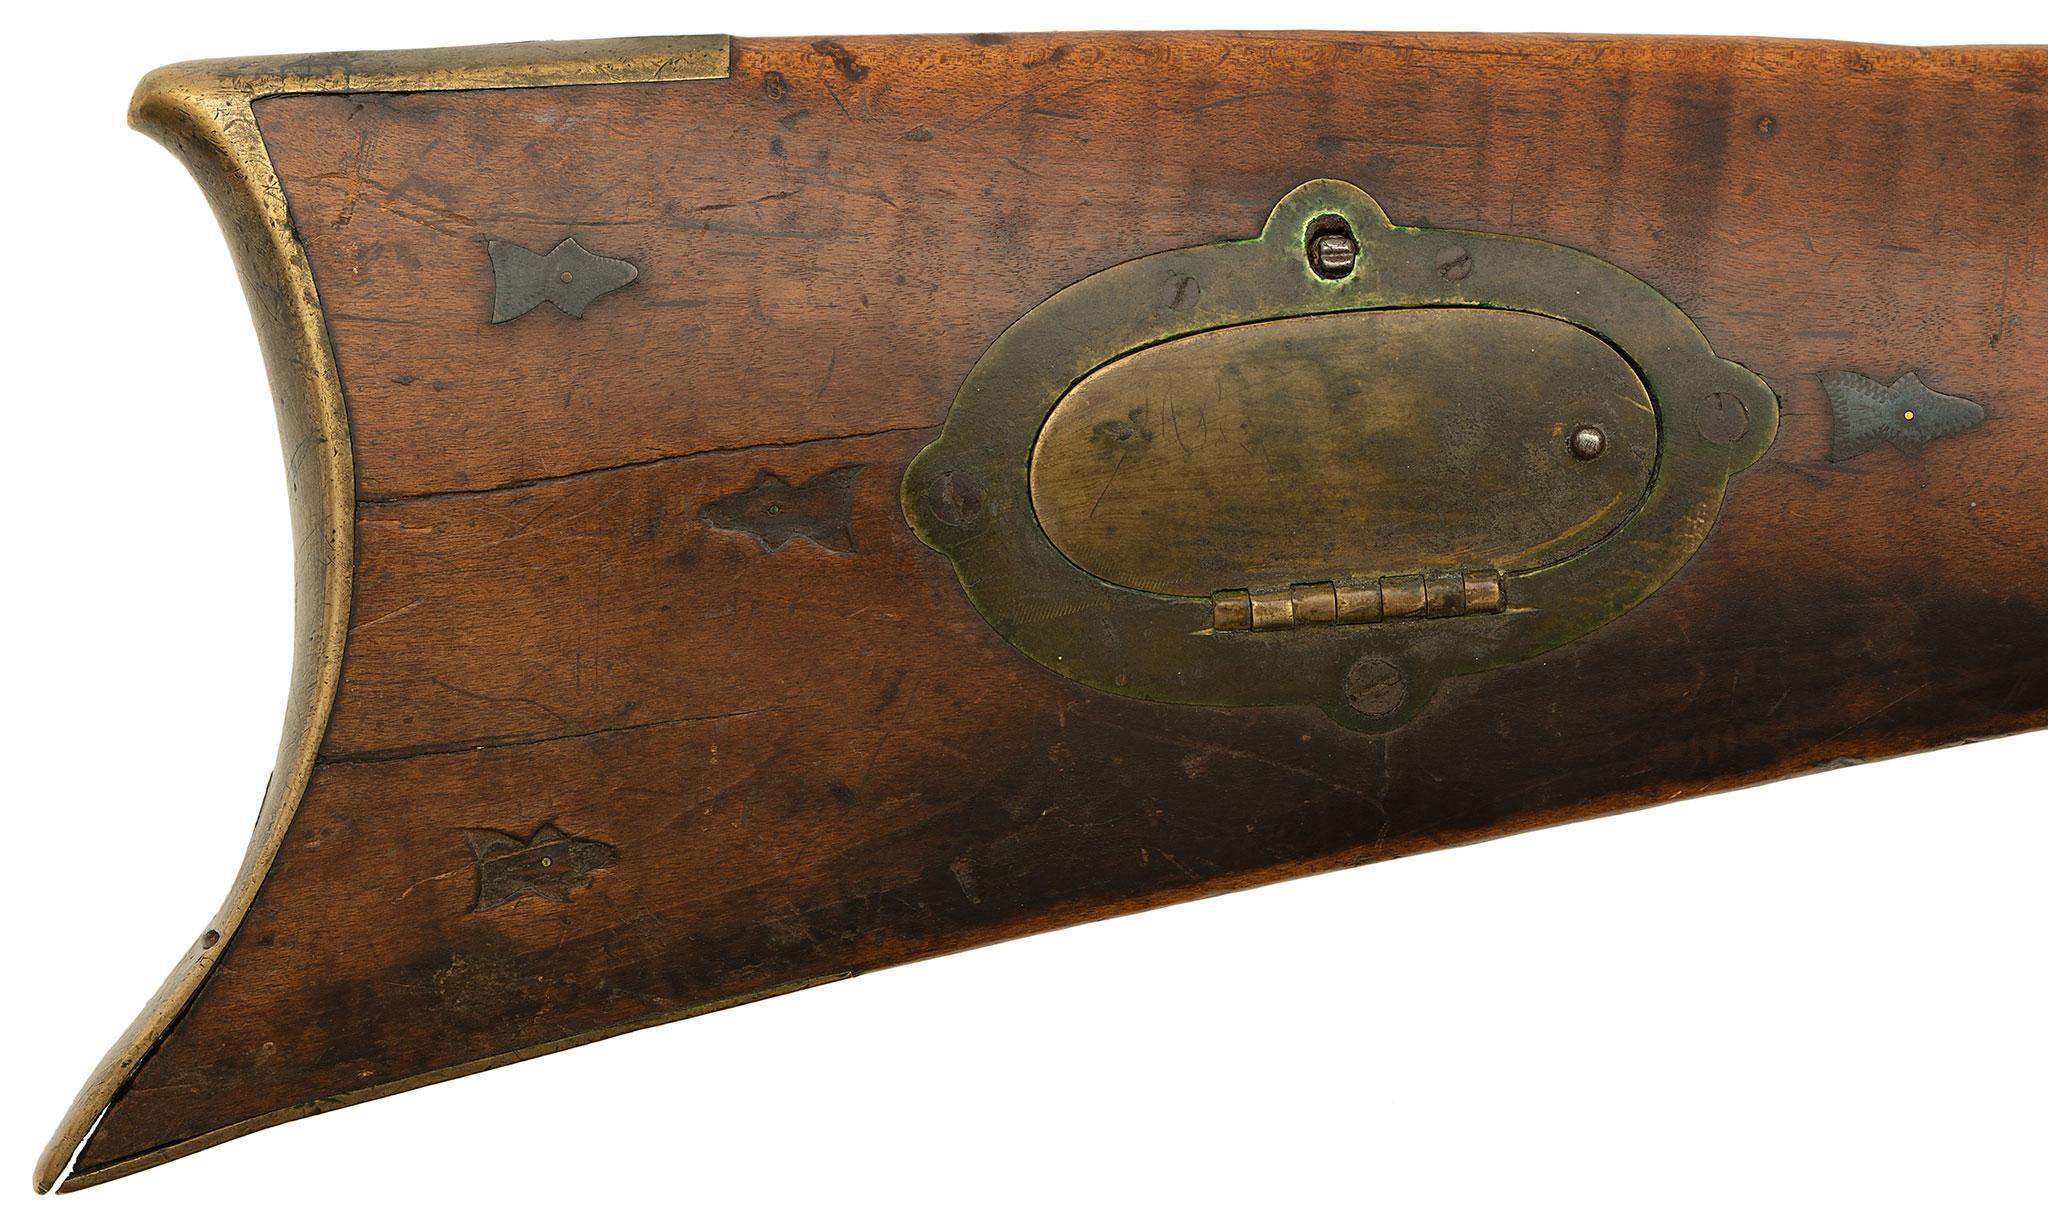 Percussion Half Stock Plains Style Rifle By John Smith